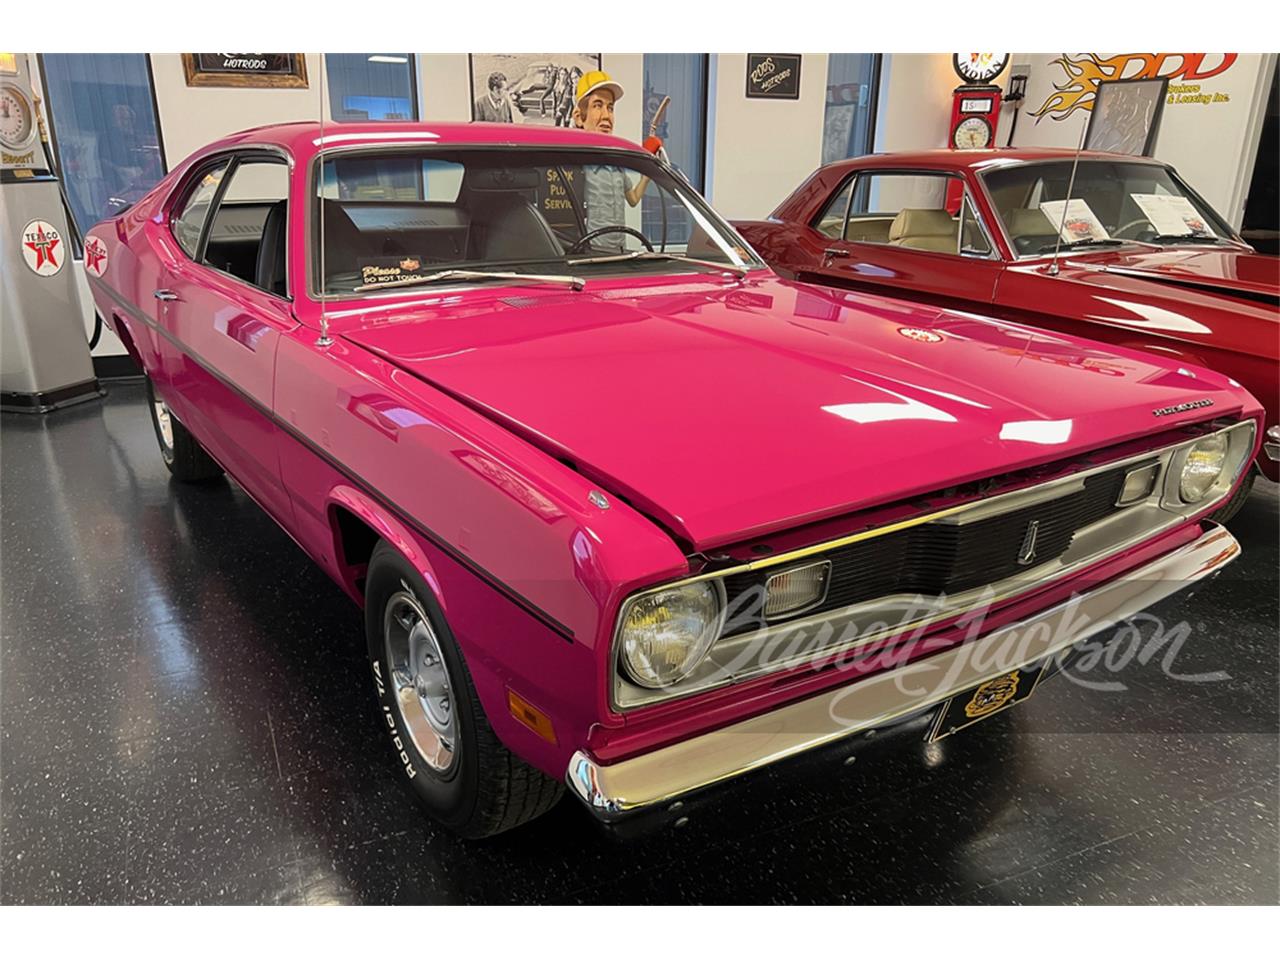 For Sale at Auction: 1970 Plymouth Duster in Scottsdale, Arizona for sale in Scottsdale, AZ